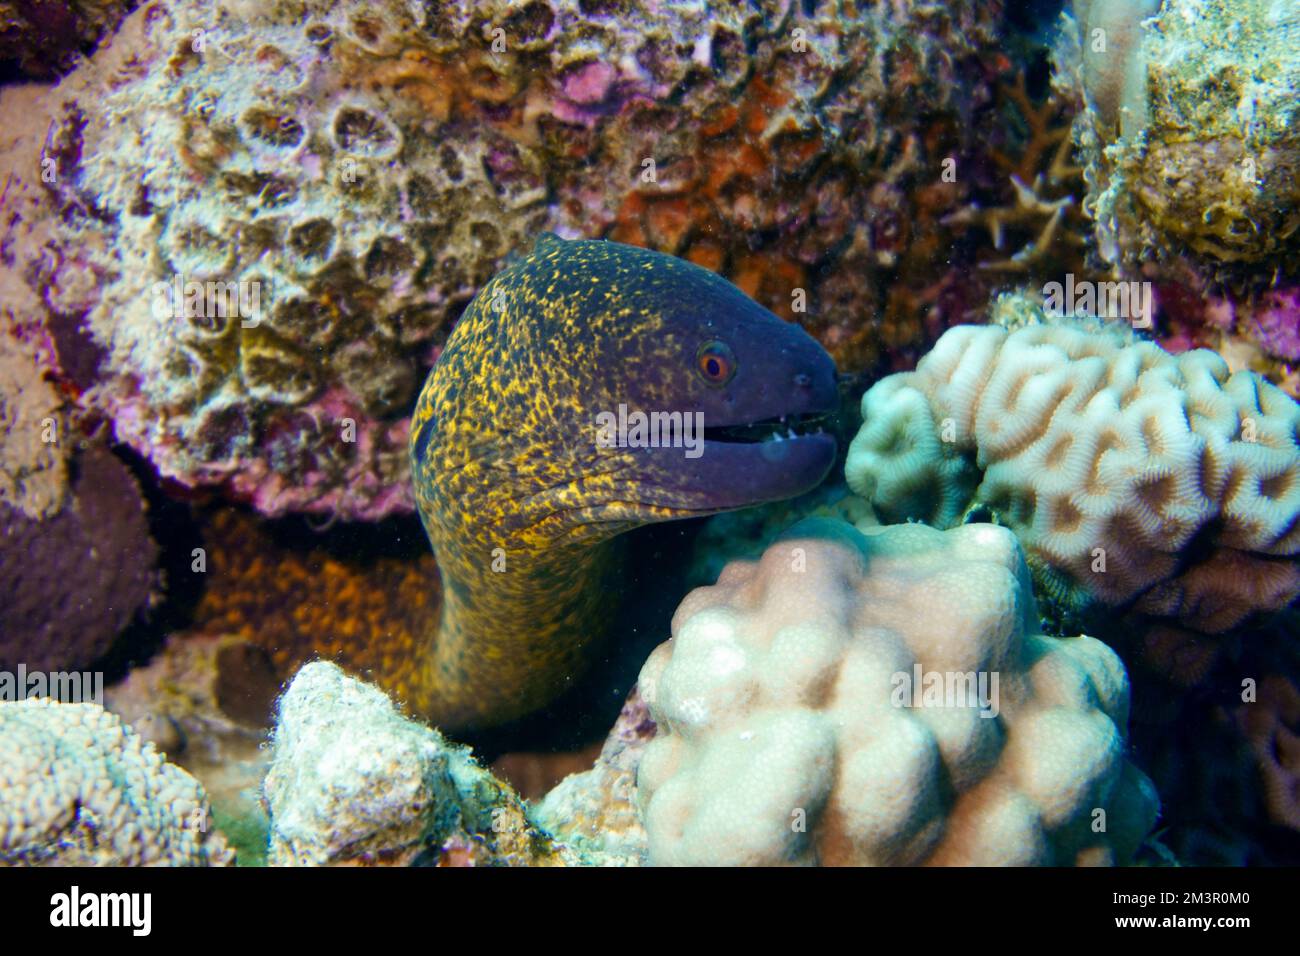 A beautiful spotted moray eel in the colourful coral reef. Scuba Diving underwater photography Stock Photo